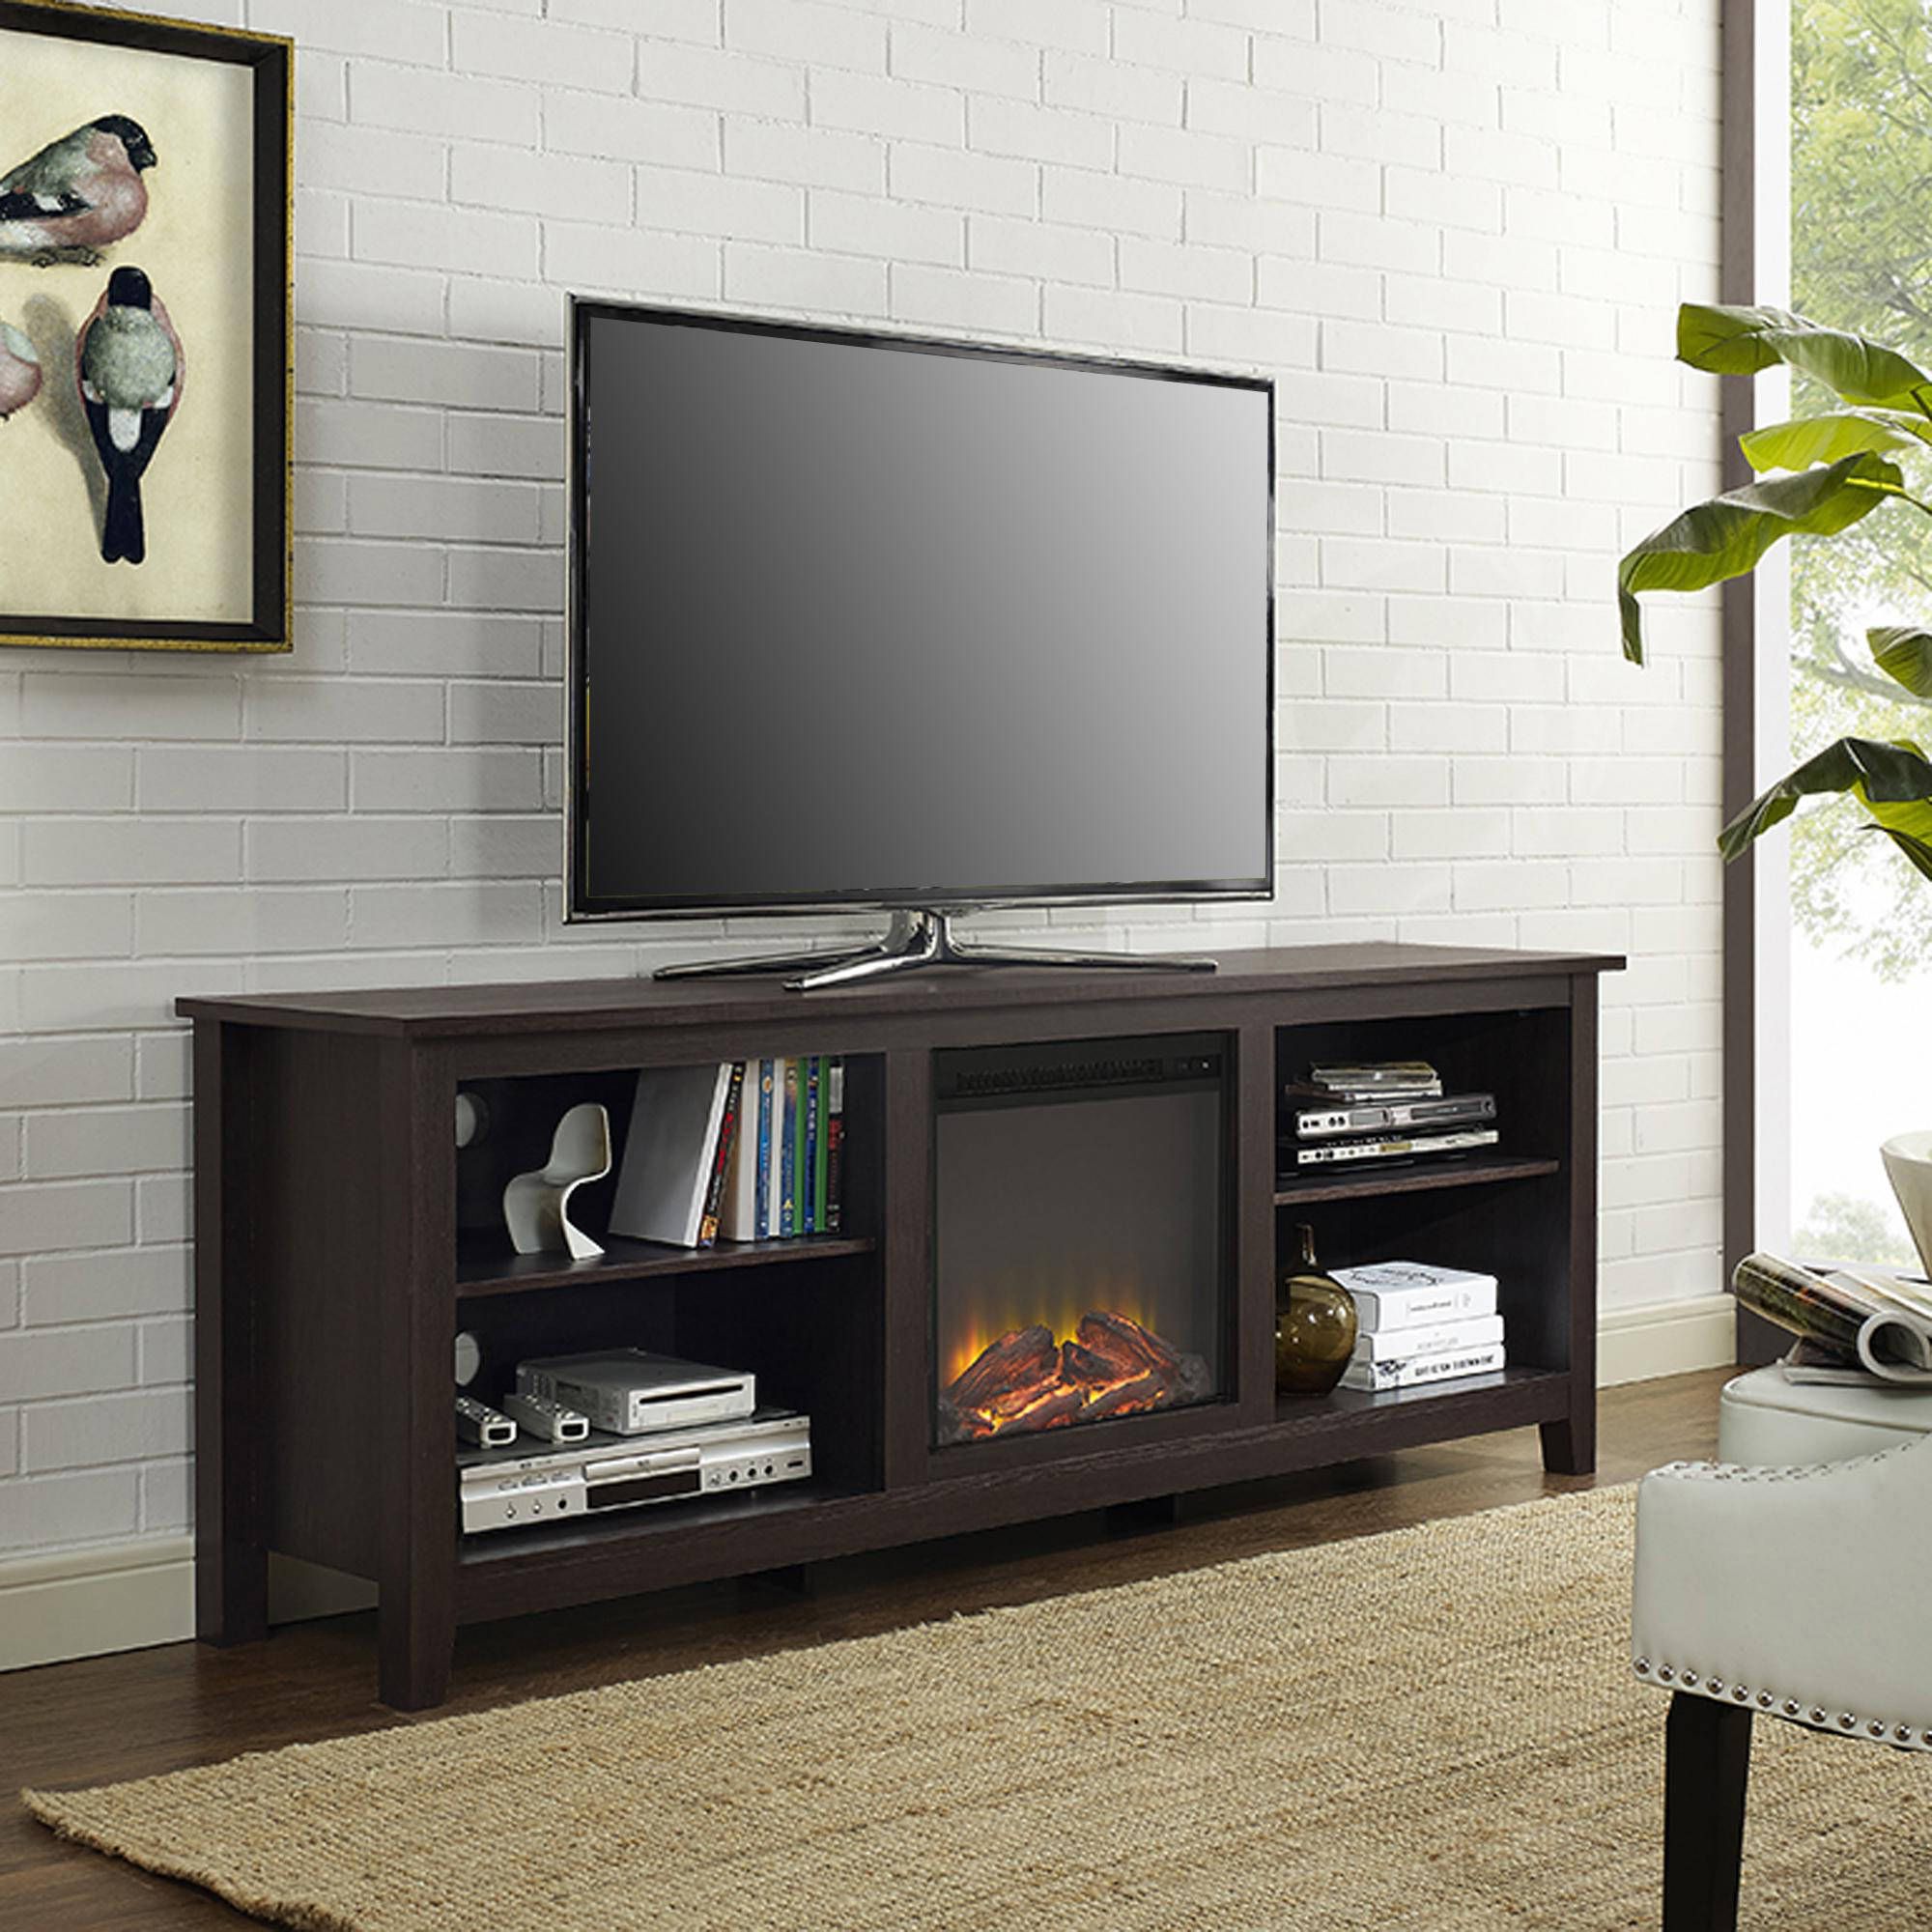 Storage Tv Stands Intended For Favorite 70" Fireplace Tv Media Storage Stand For Tv's Up To 75" Espresso (View 7 of 20)